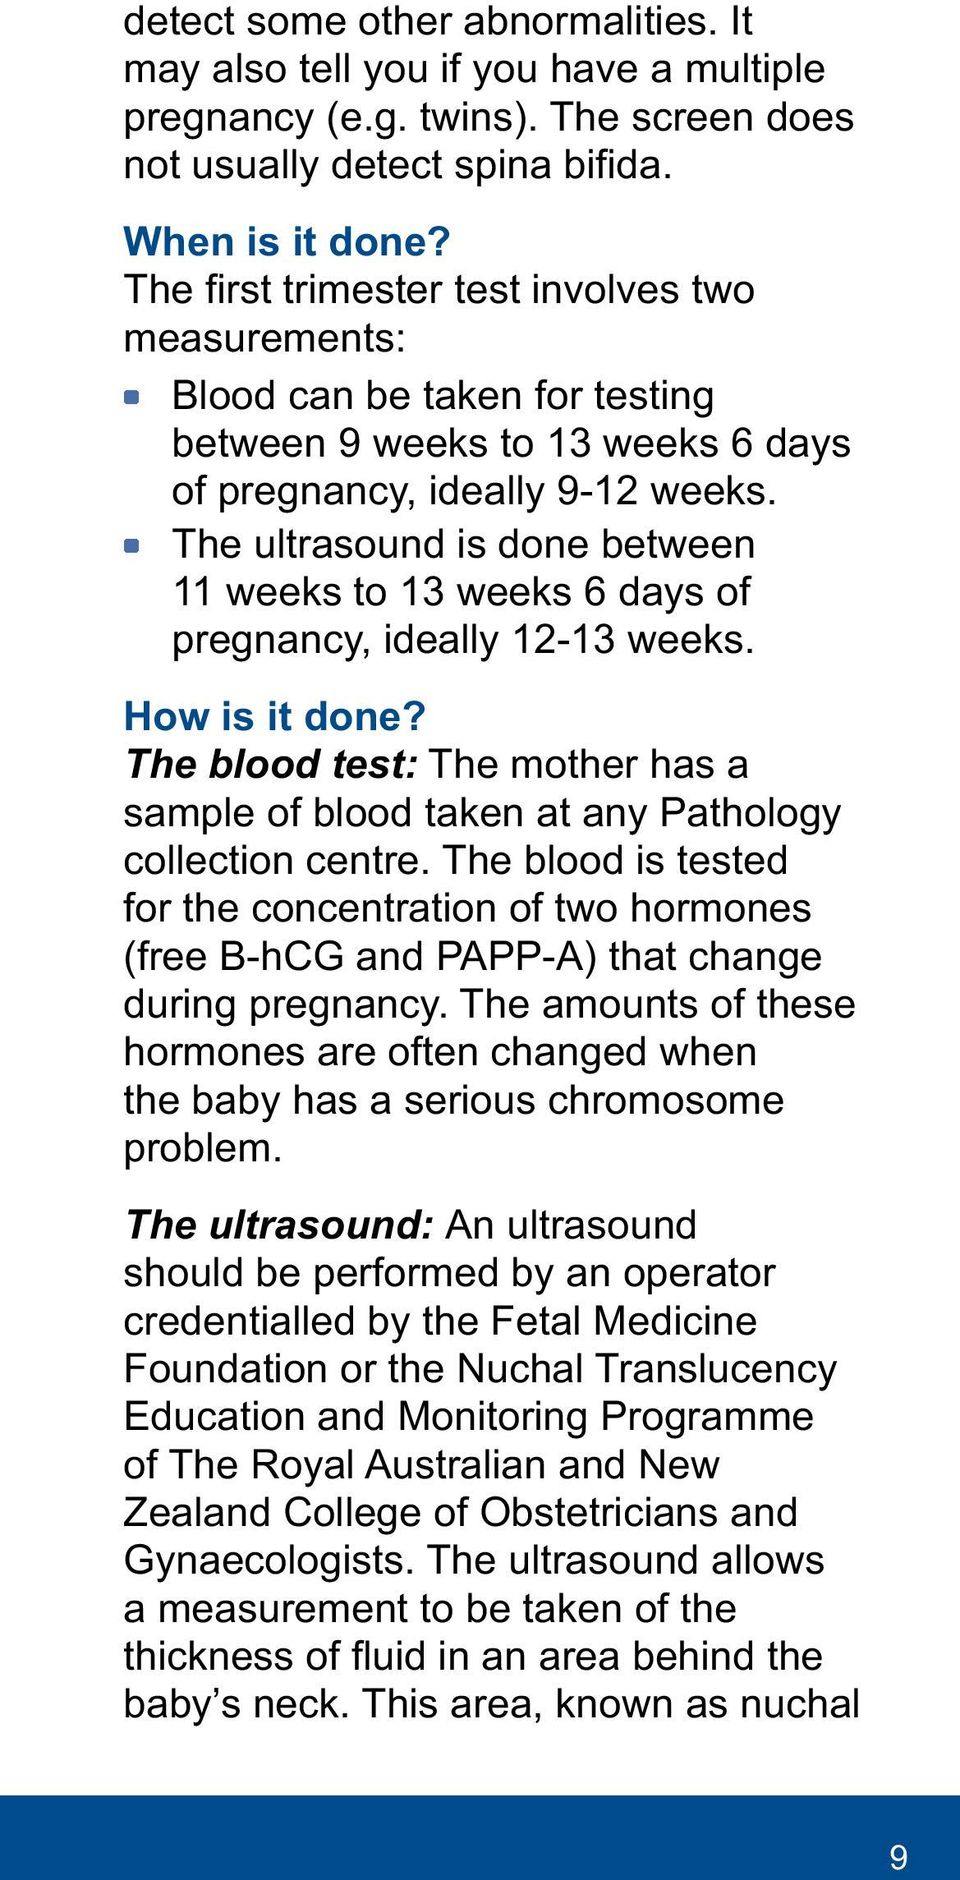 The ultrasound is done between 11 weeks to 13 weeks 6 days of pregnancy, ideally 12-13 weeks. How is it done? The blood test: The mother has a sample of blood taken at any Pathology collection centre.